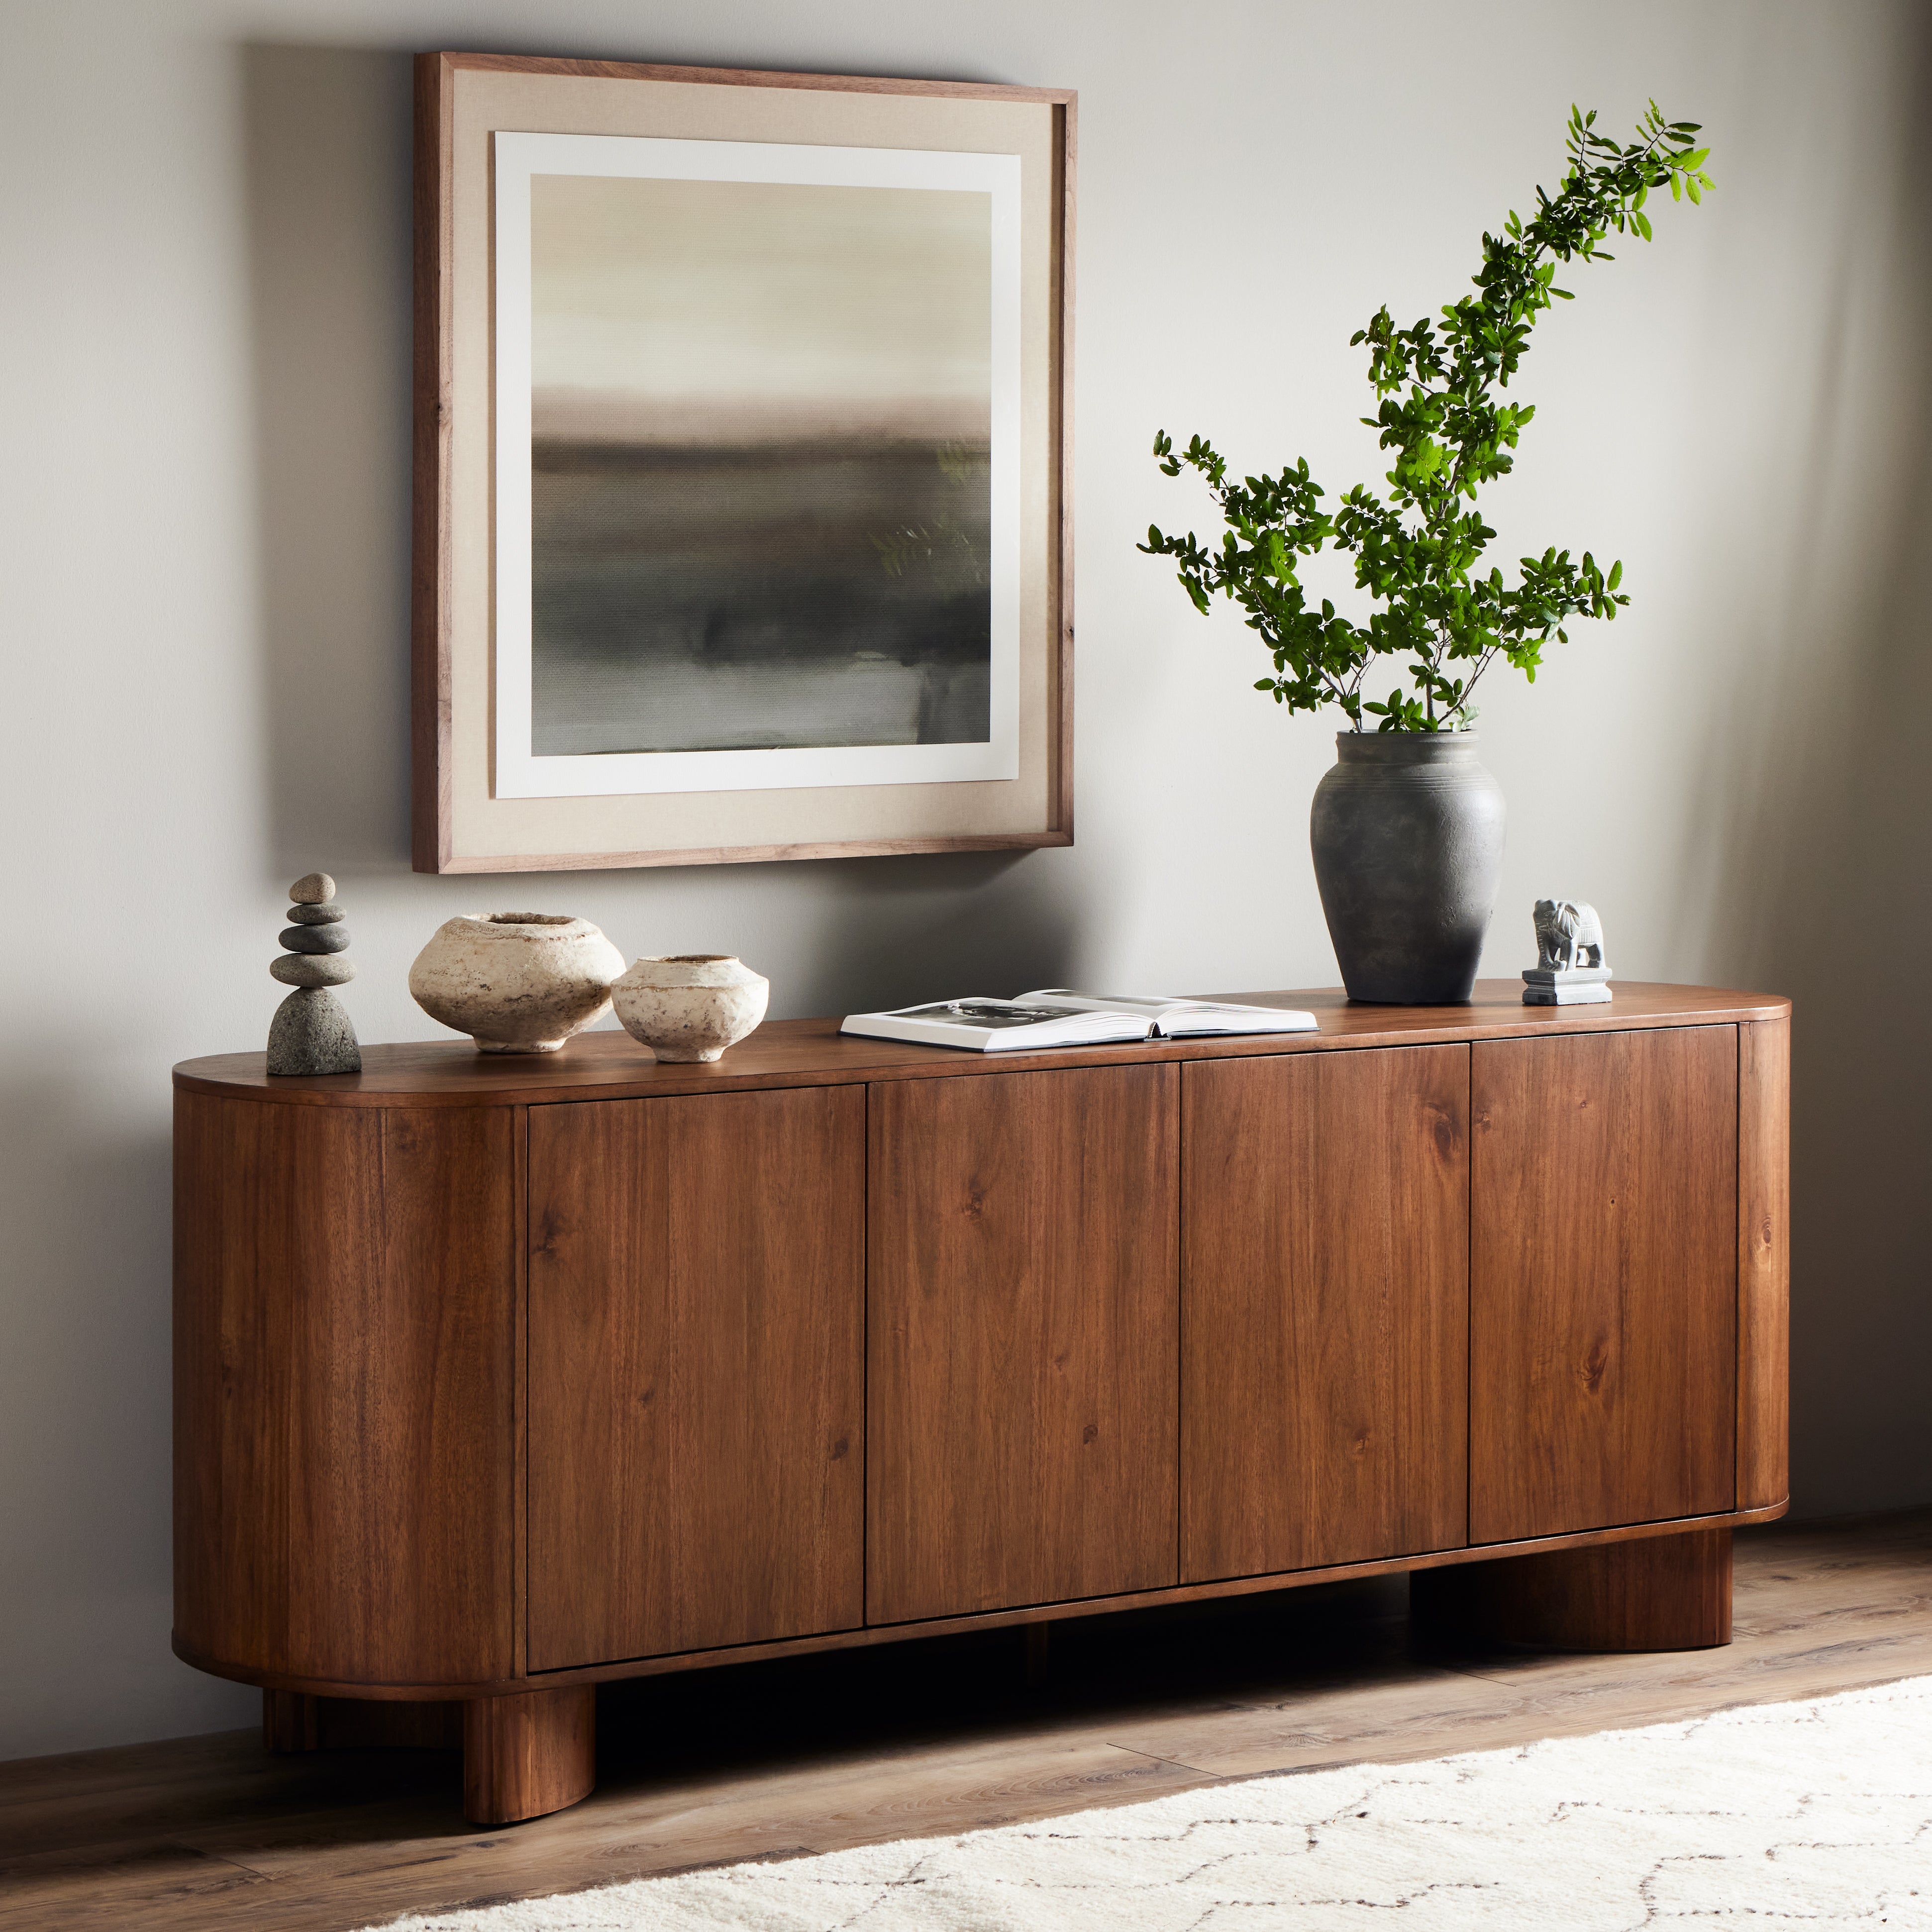 Seasoned brown acacia forms curved legs and the cabinets of this sideboard. Generous space for all dining storage needs. Amethyst Home provides interior design, new construction, custom furniture, and area rugs in the Boston metro area.